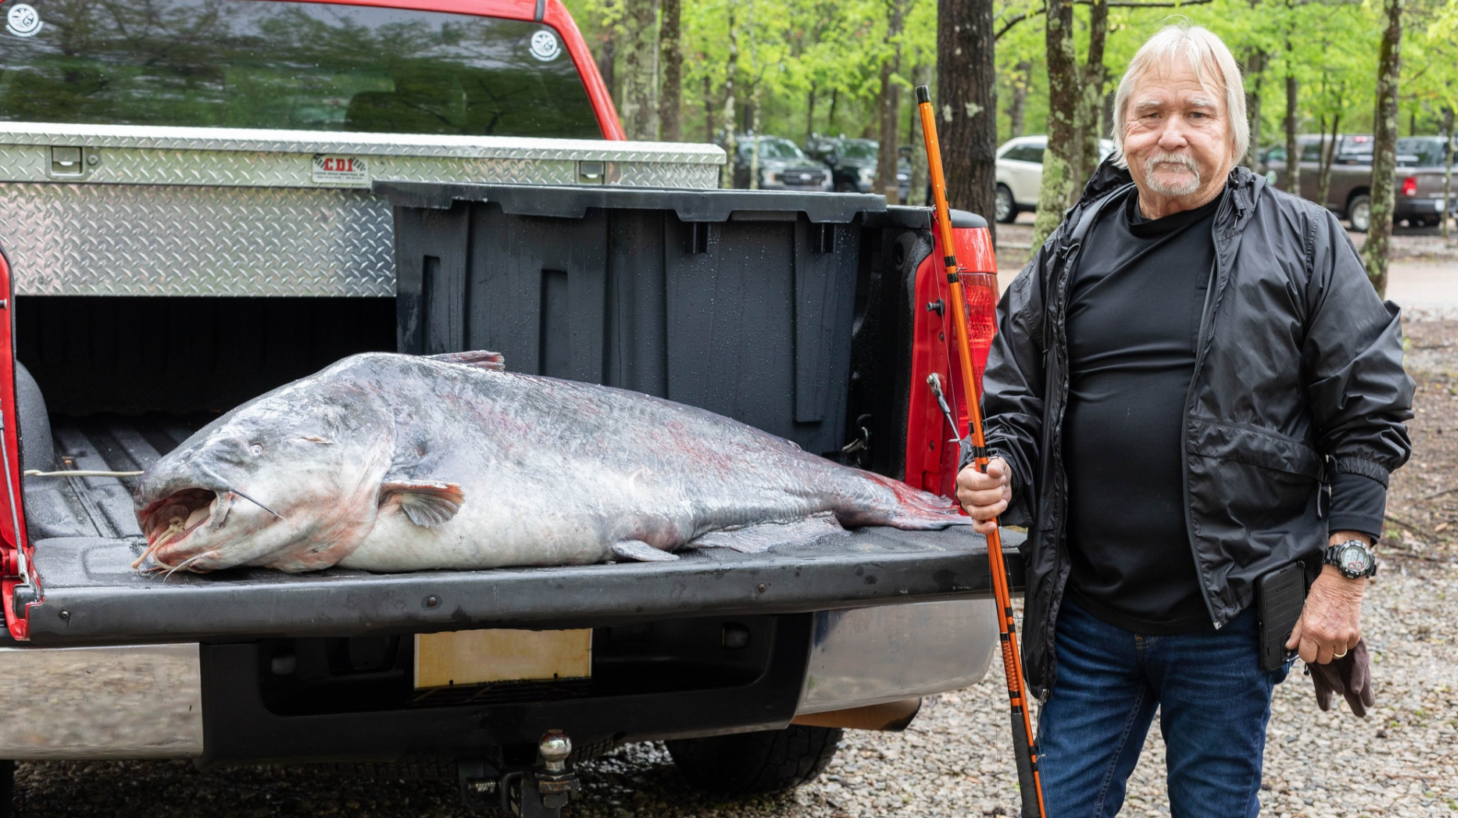 Eugene Cronley and his record-breaking blue catfish